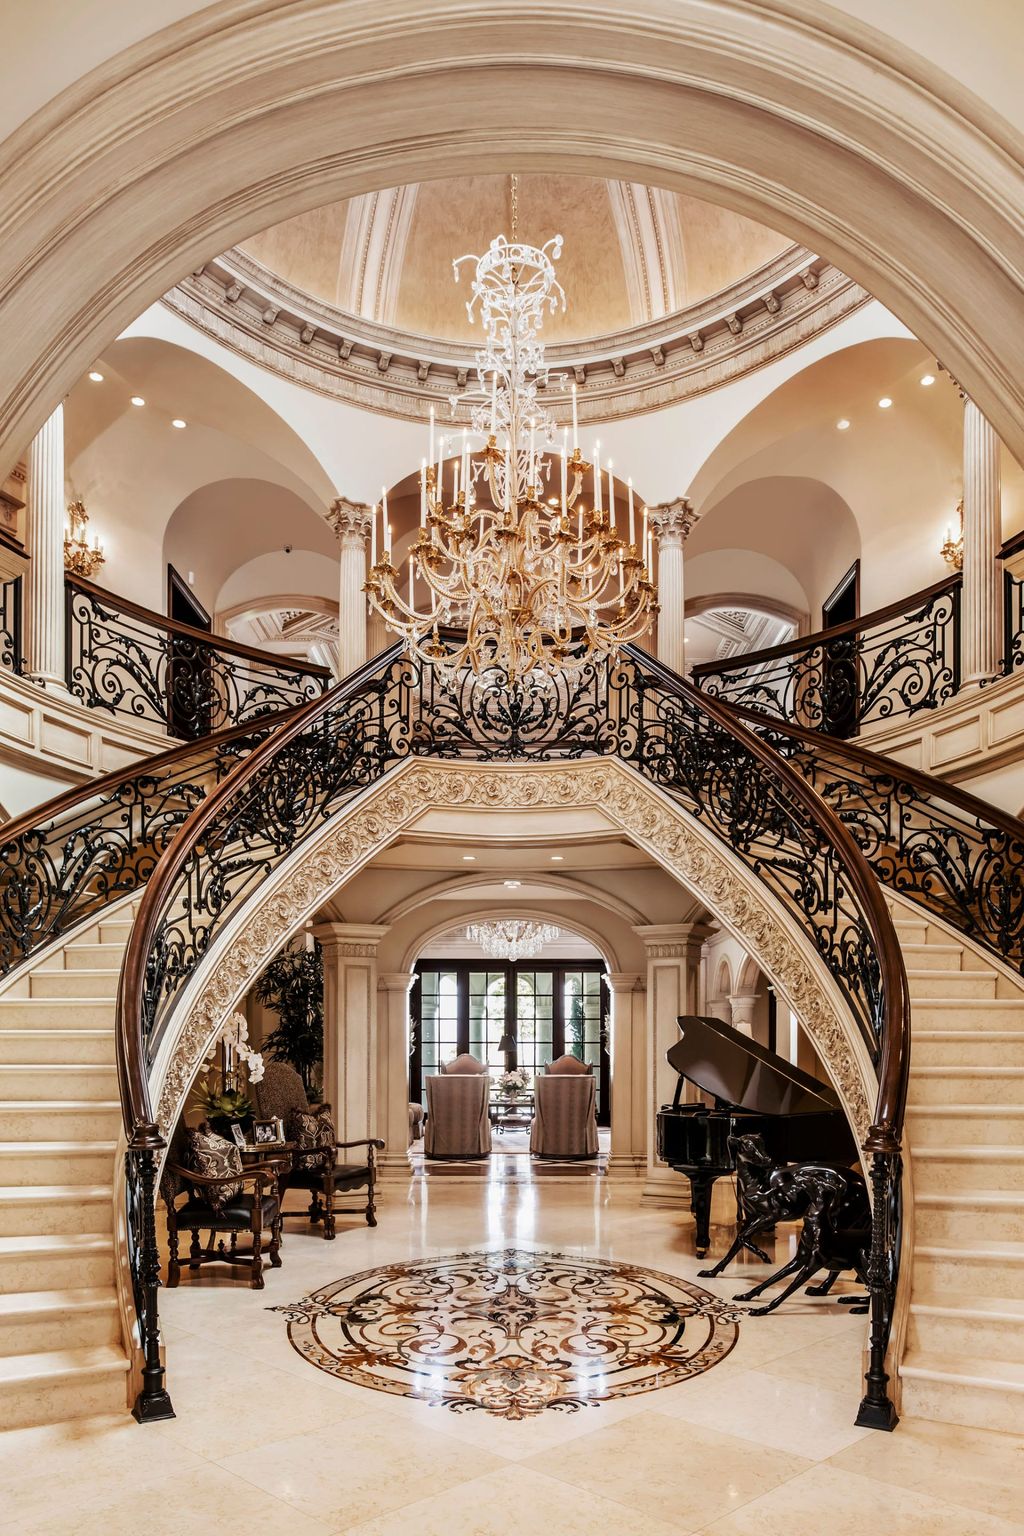 This-32000000-Classic-French-Chateau-in-Calabasas-is-A-World-of-Luxury-and-Quality-3